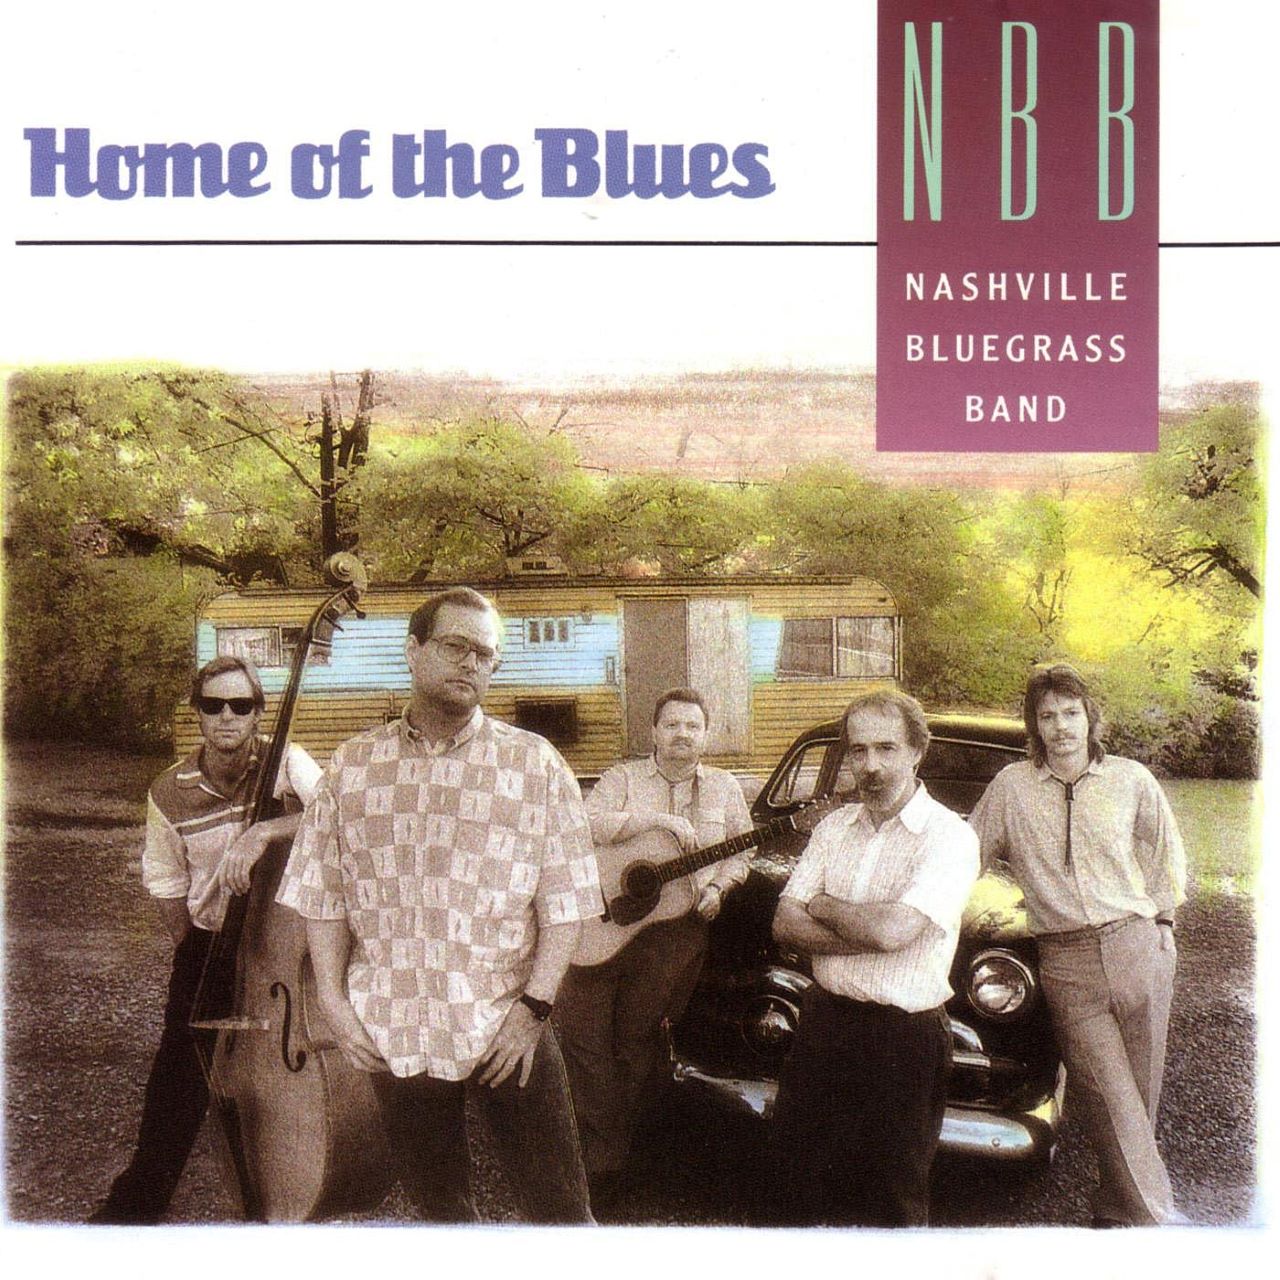 Nashville Bluegrass Band - Home Of The Blues cover album